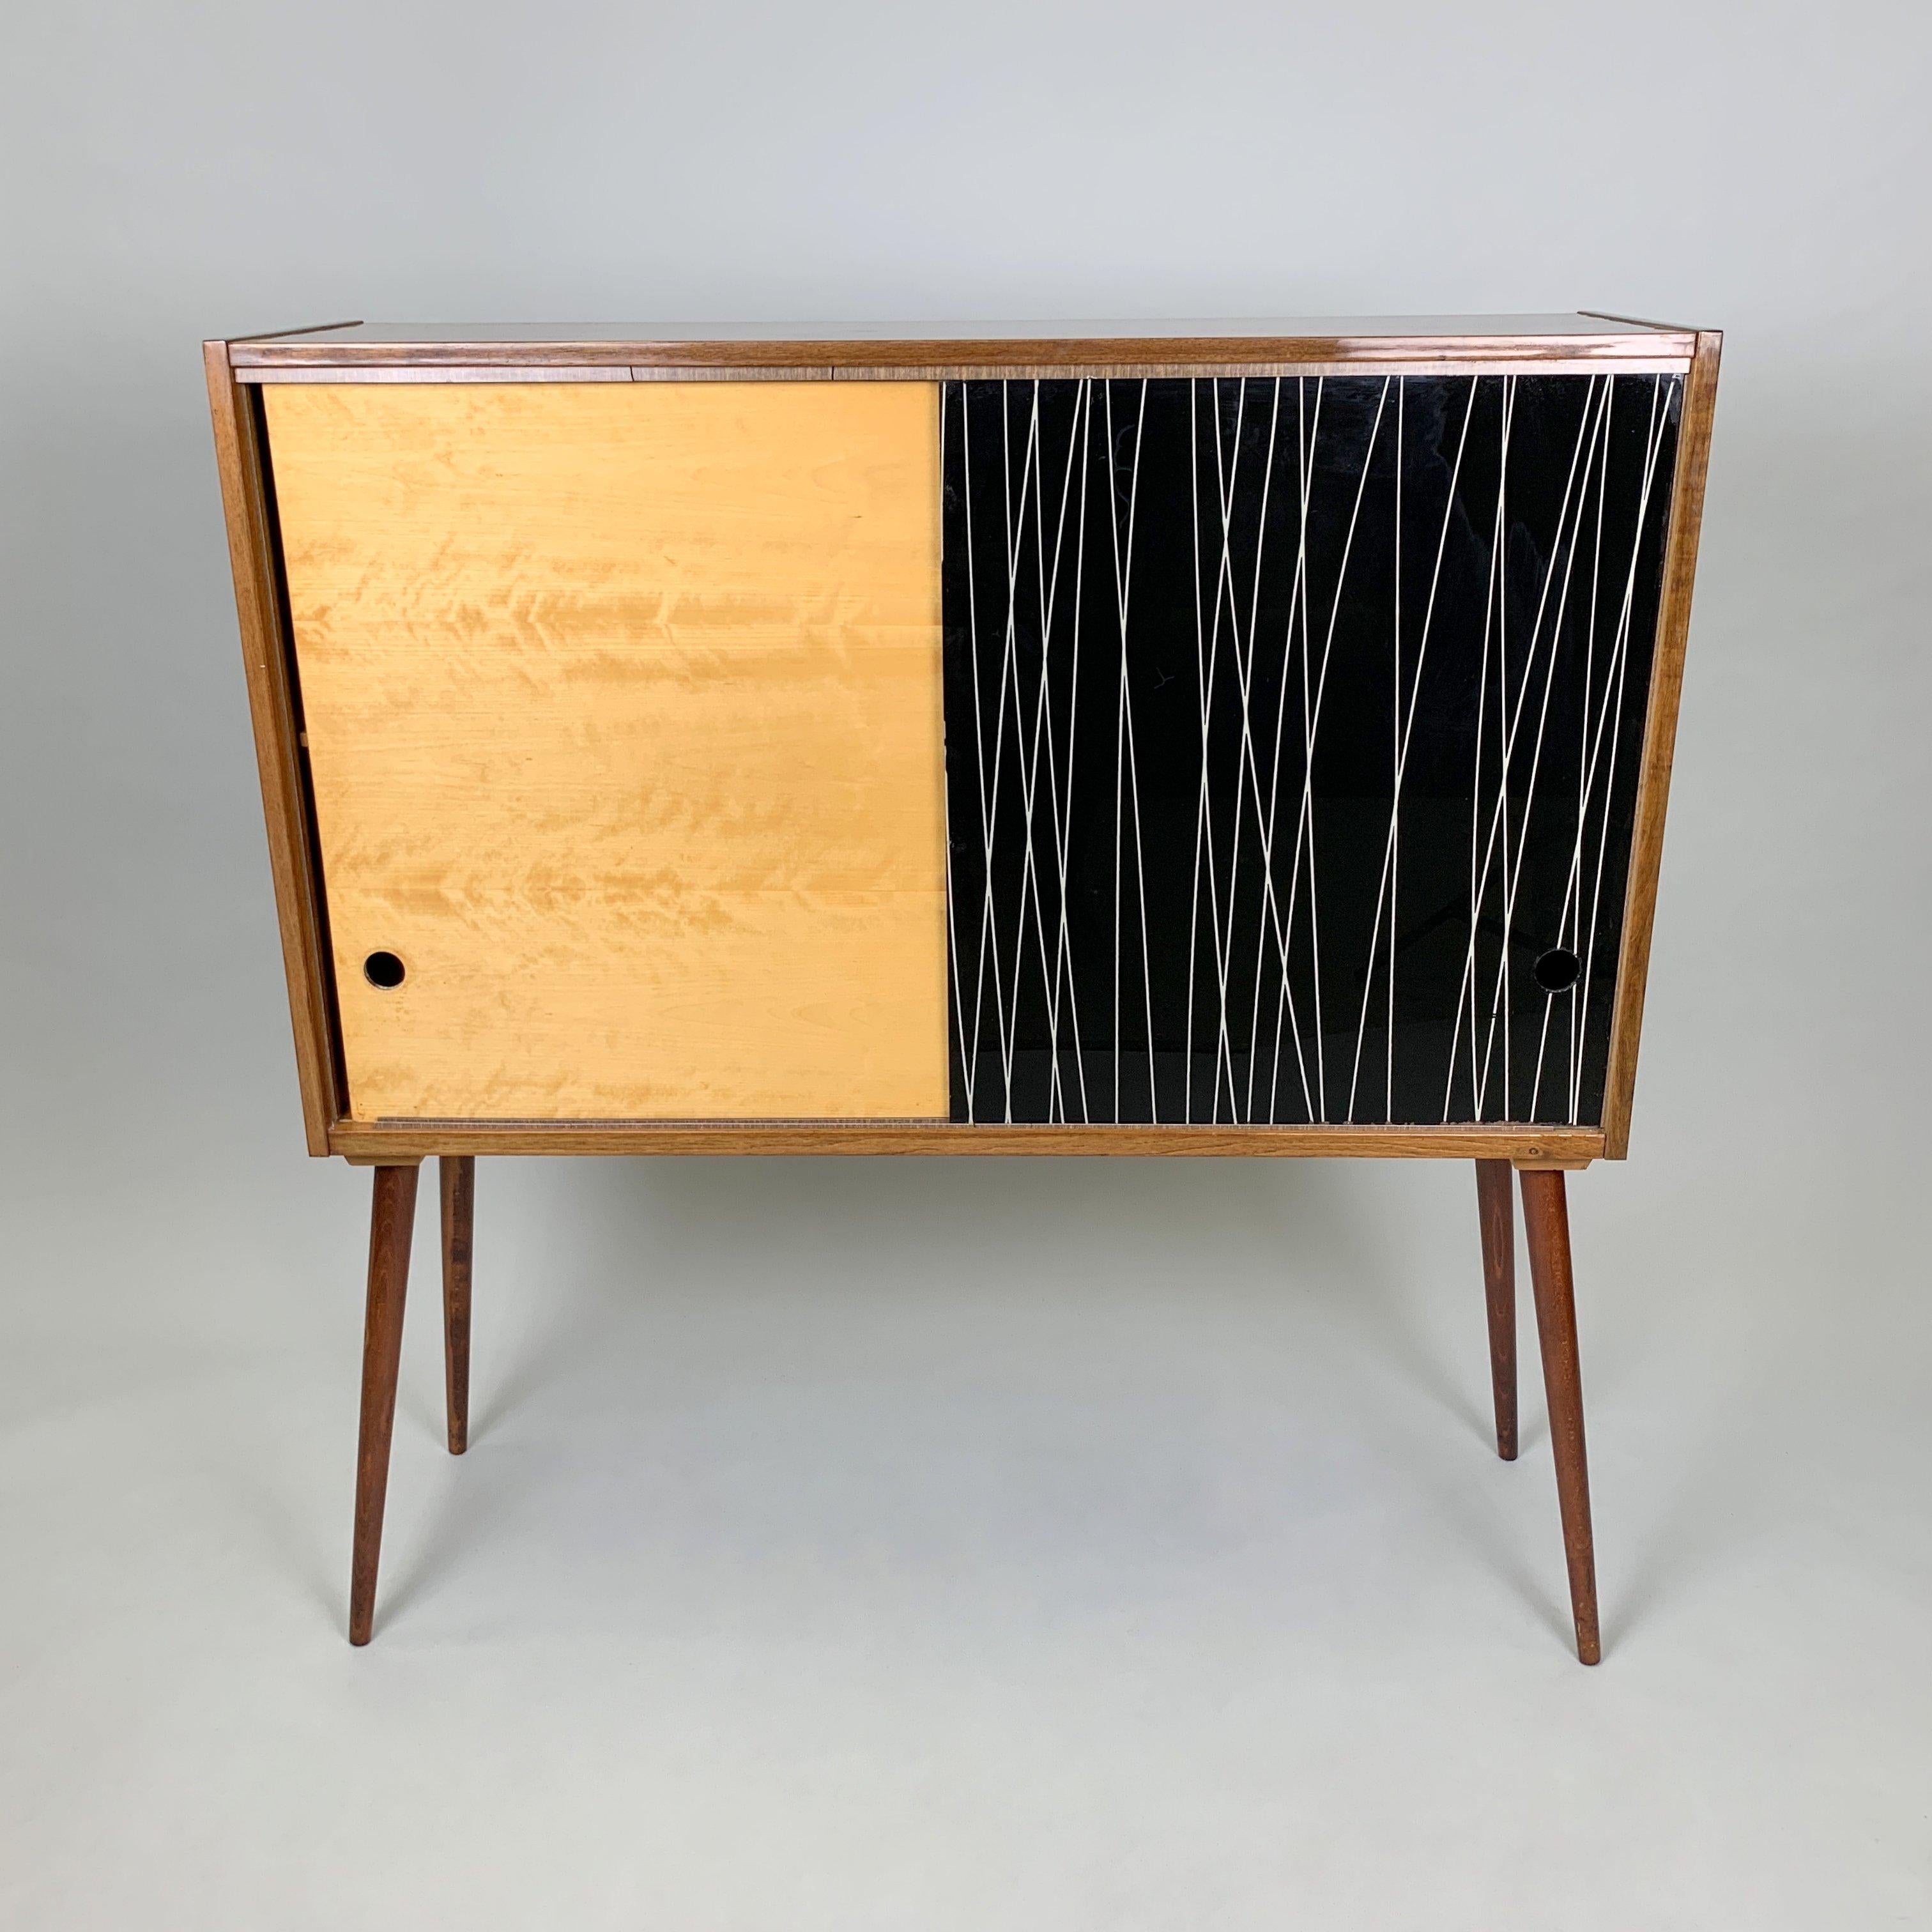 Vintage cabinet with sliding door, where one part is equipped with it't original mirror. Designed by Bohumil Landsman and Hubert Nepozitek for Jitona in former Czechoslovakia in the 1960s. Good original condition with some signs of use (see photo).